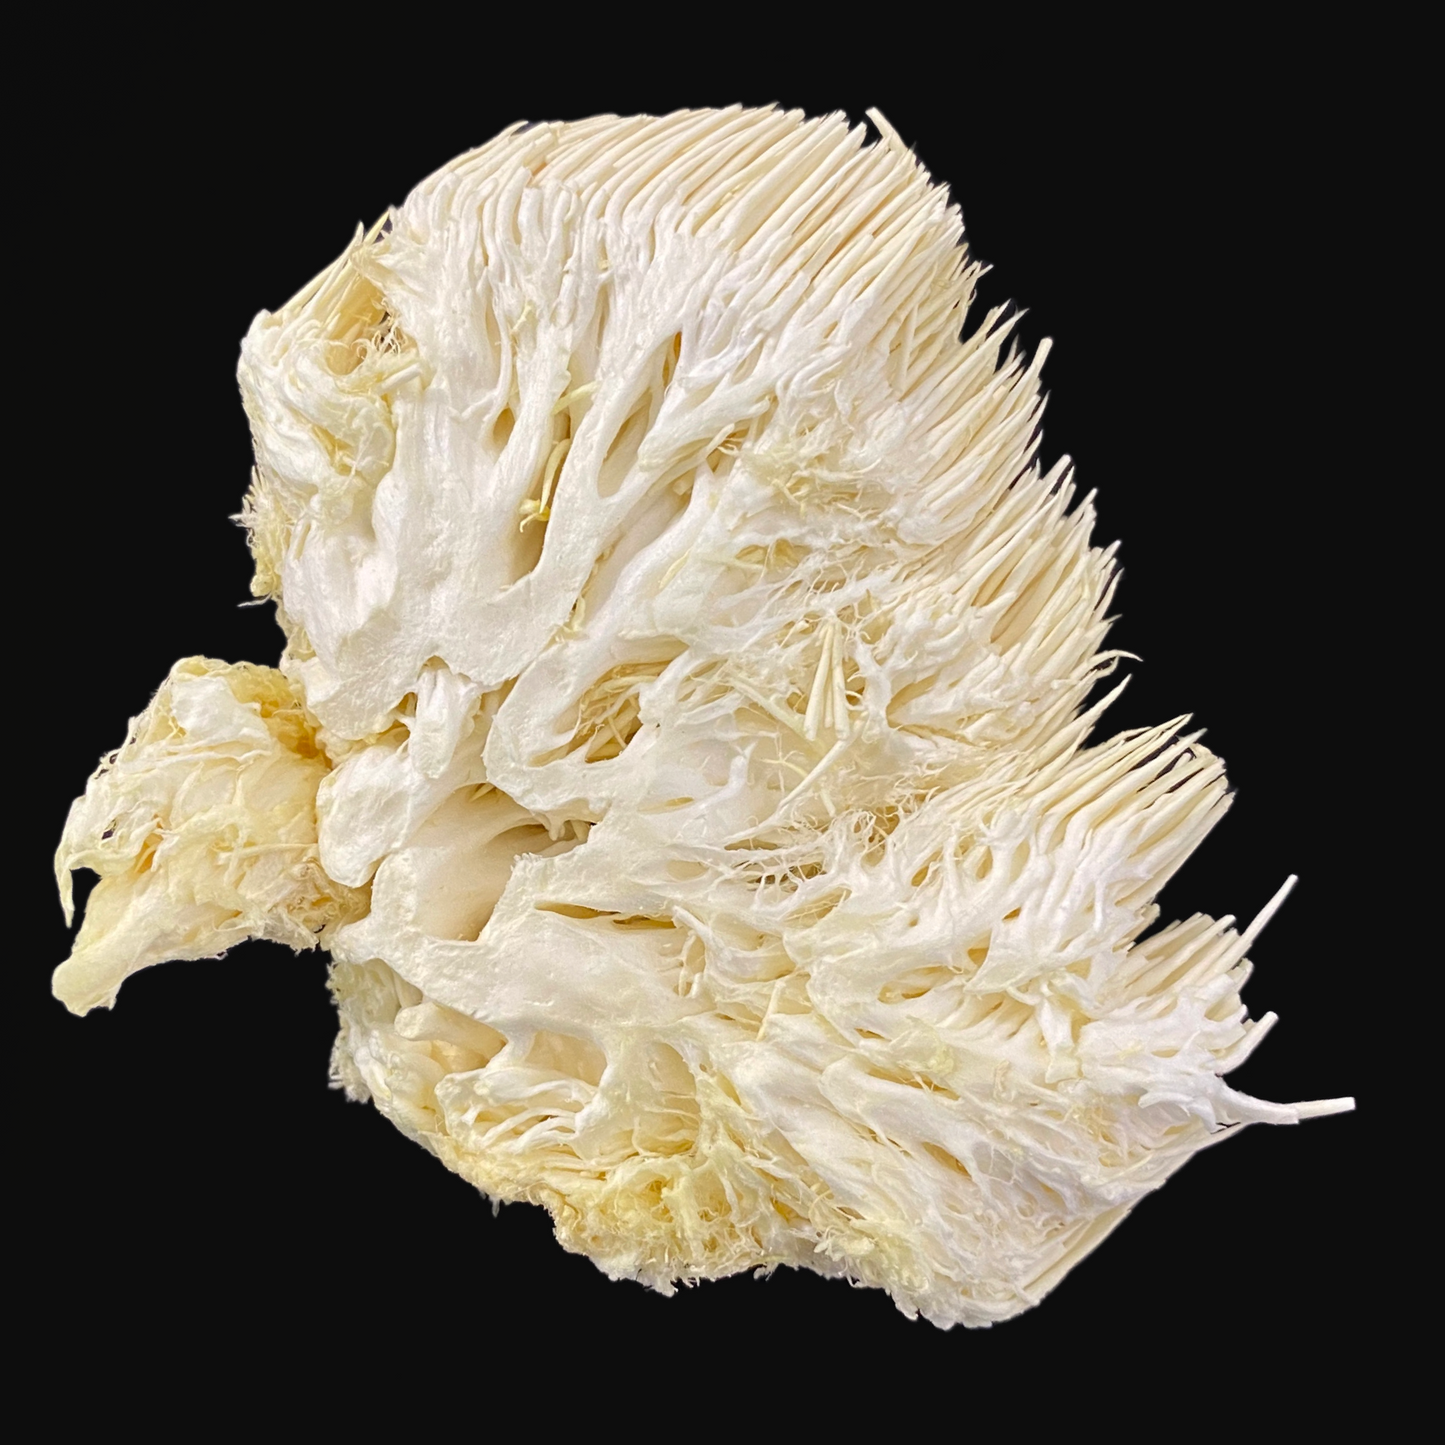 freeze dried lions mane - side view